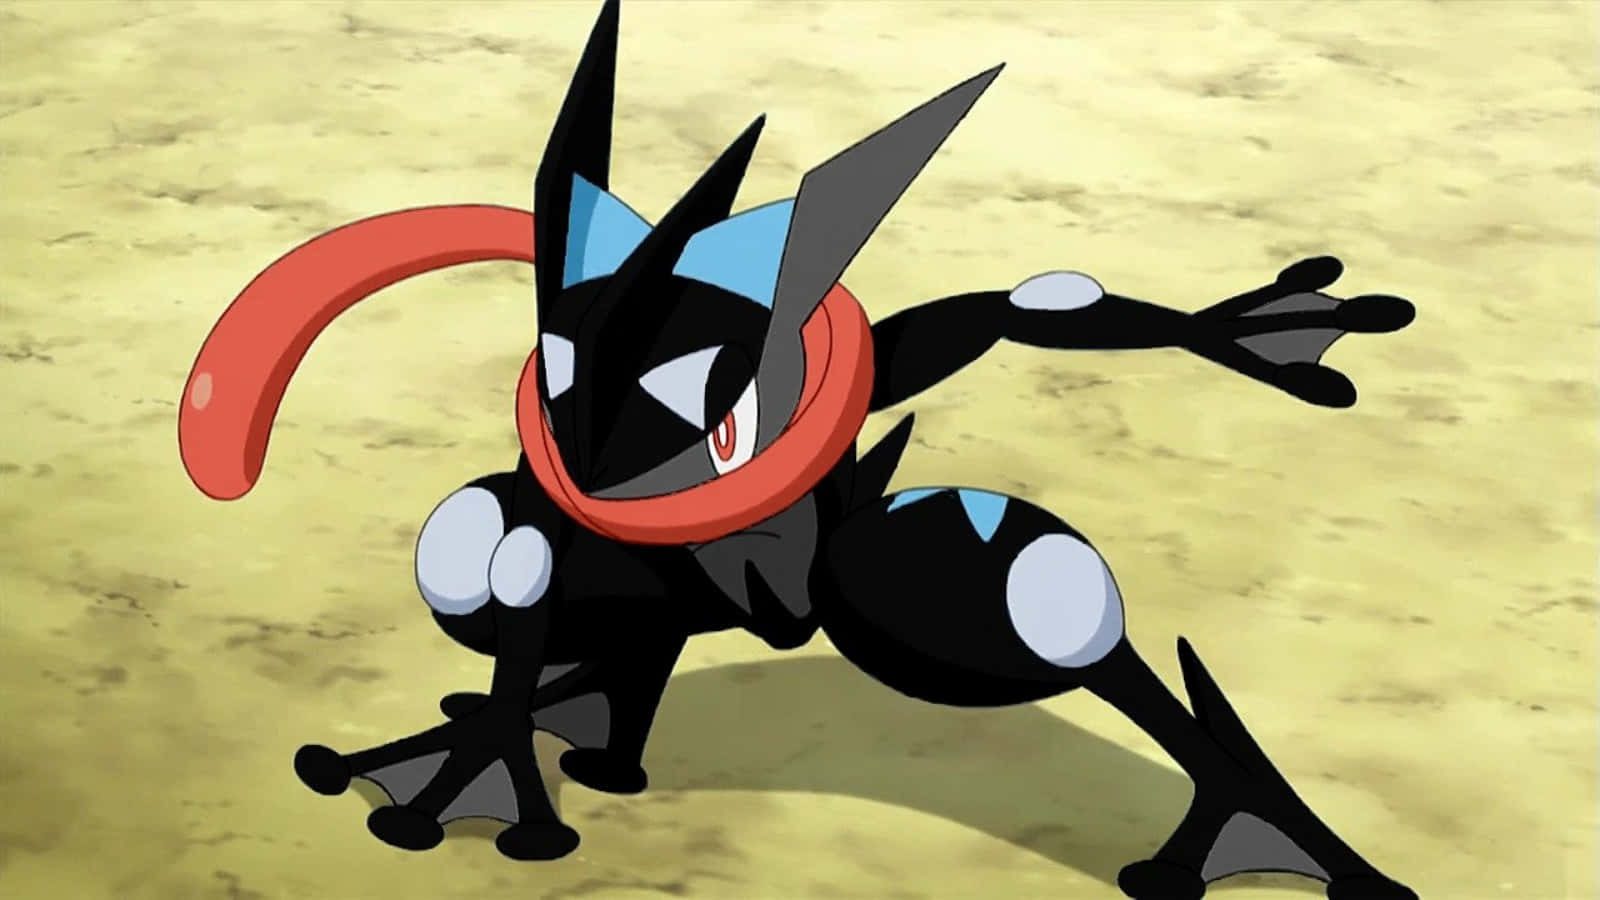 Send chills down the spine of your opponents with Greninja!